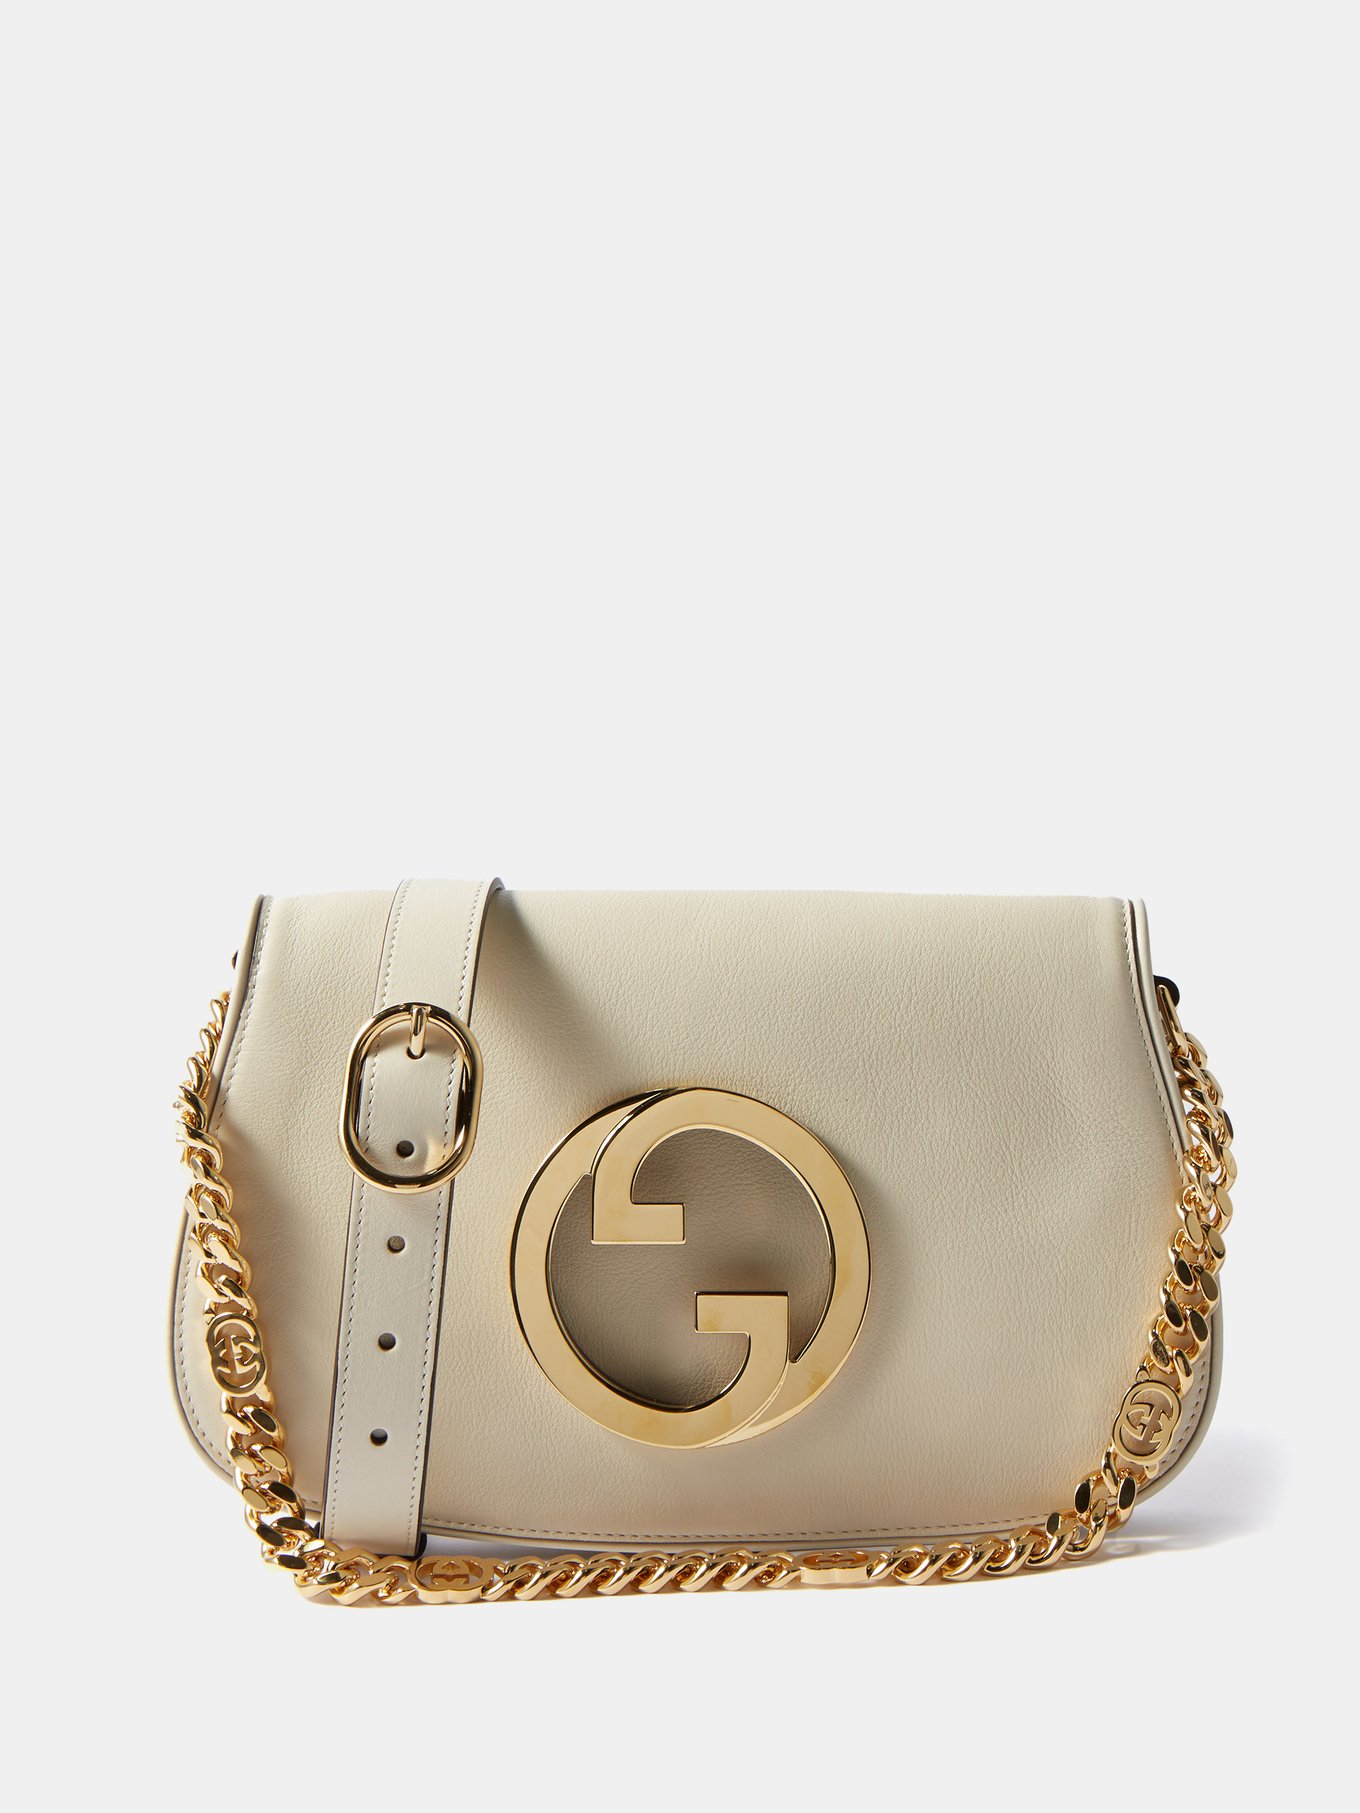 Flore chain leather crossbody bag